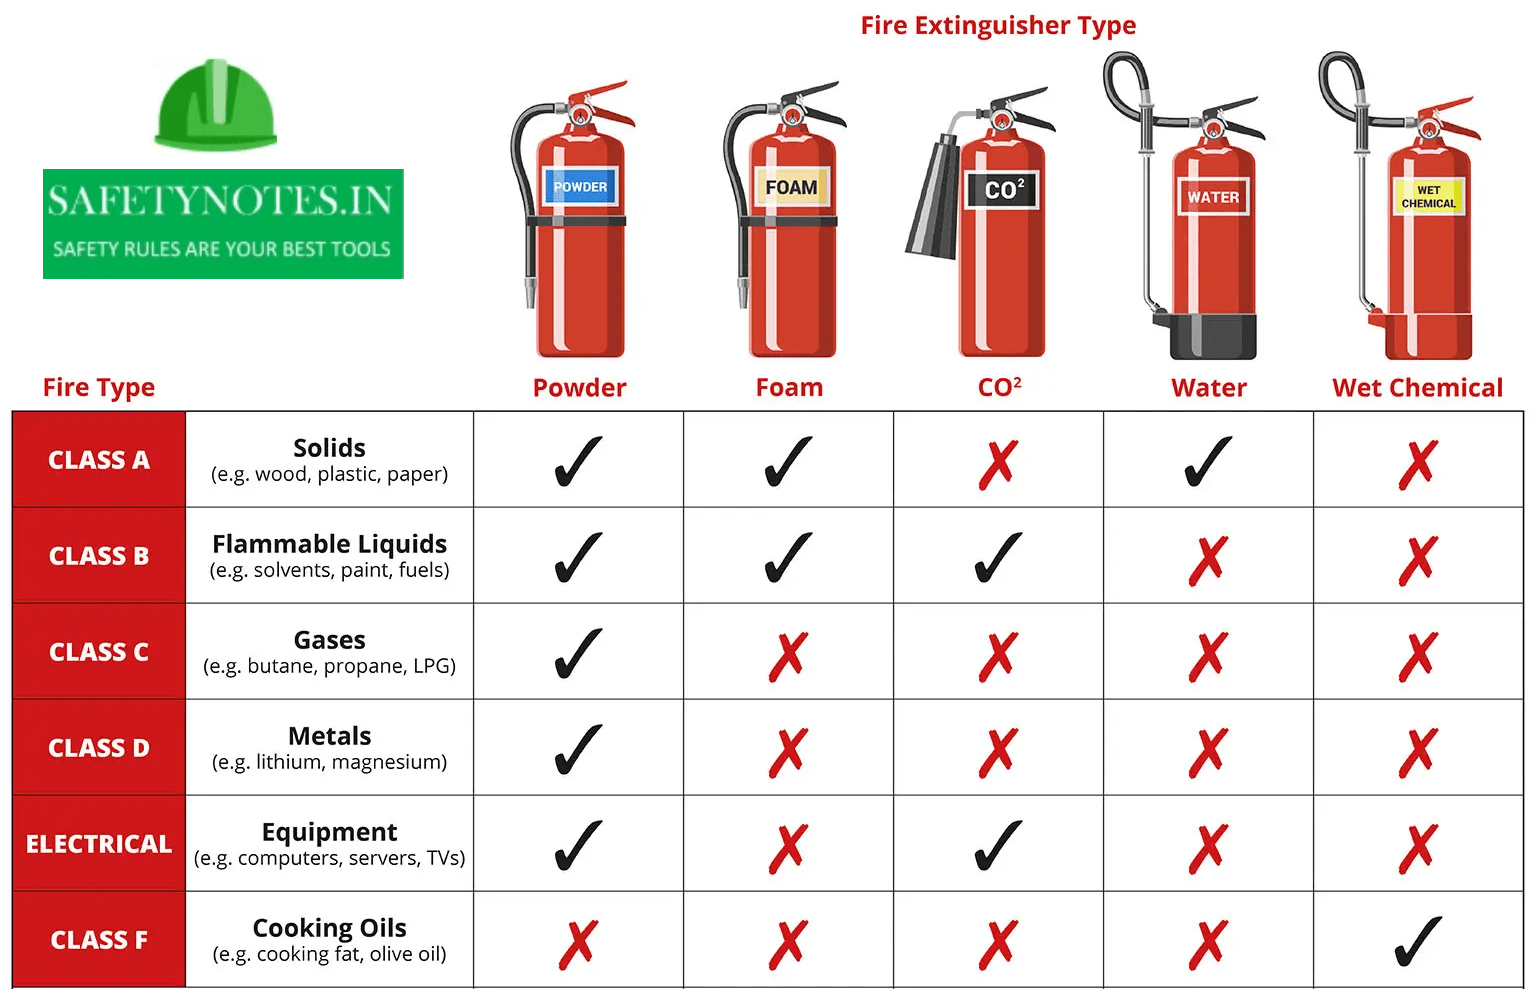 FIRE EXTINGUISHER TYPES AND FIRE CLASS 